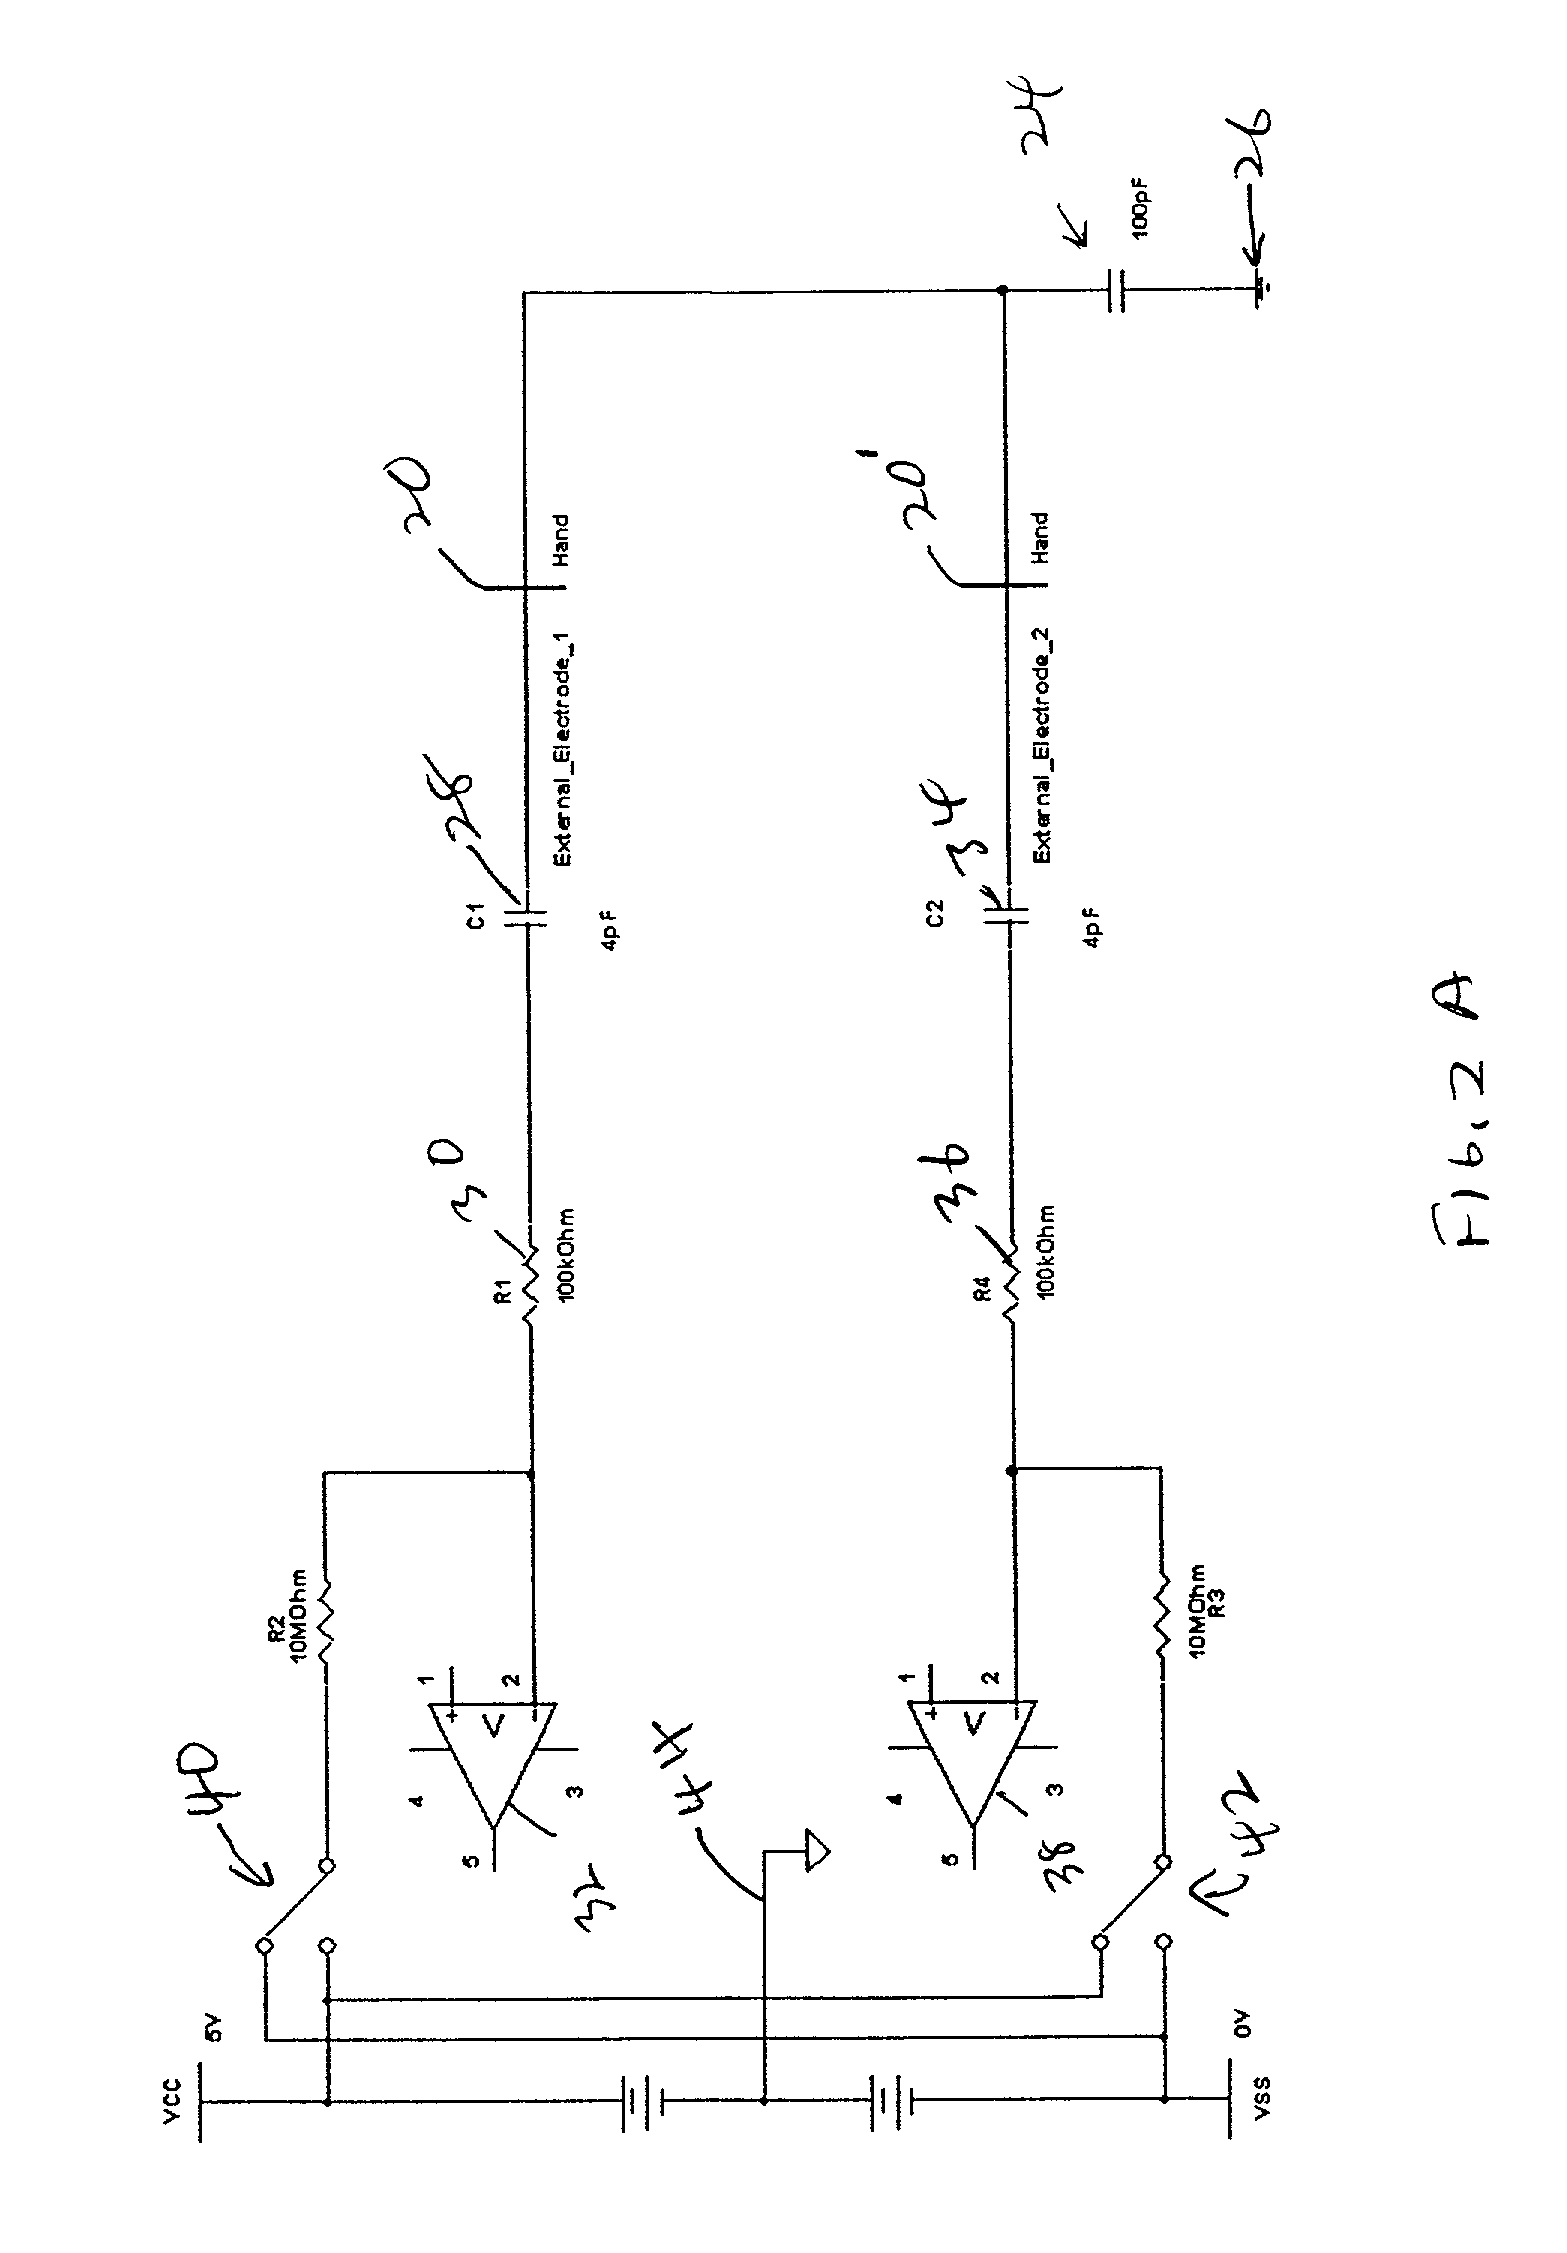 Input device with capacitive antenna